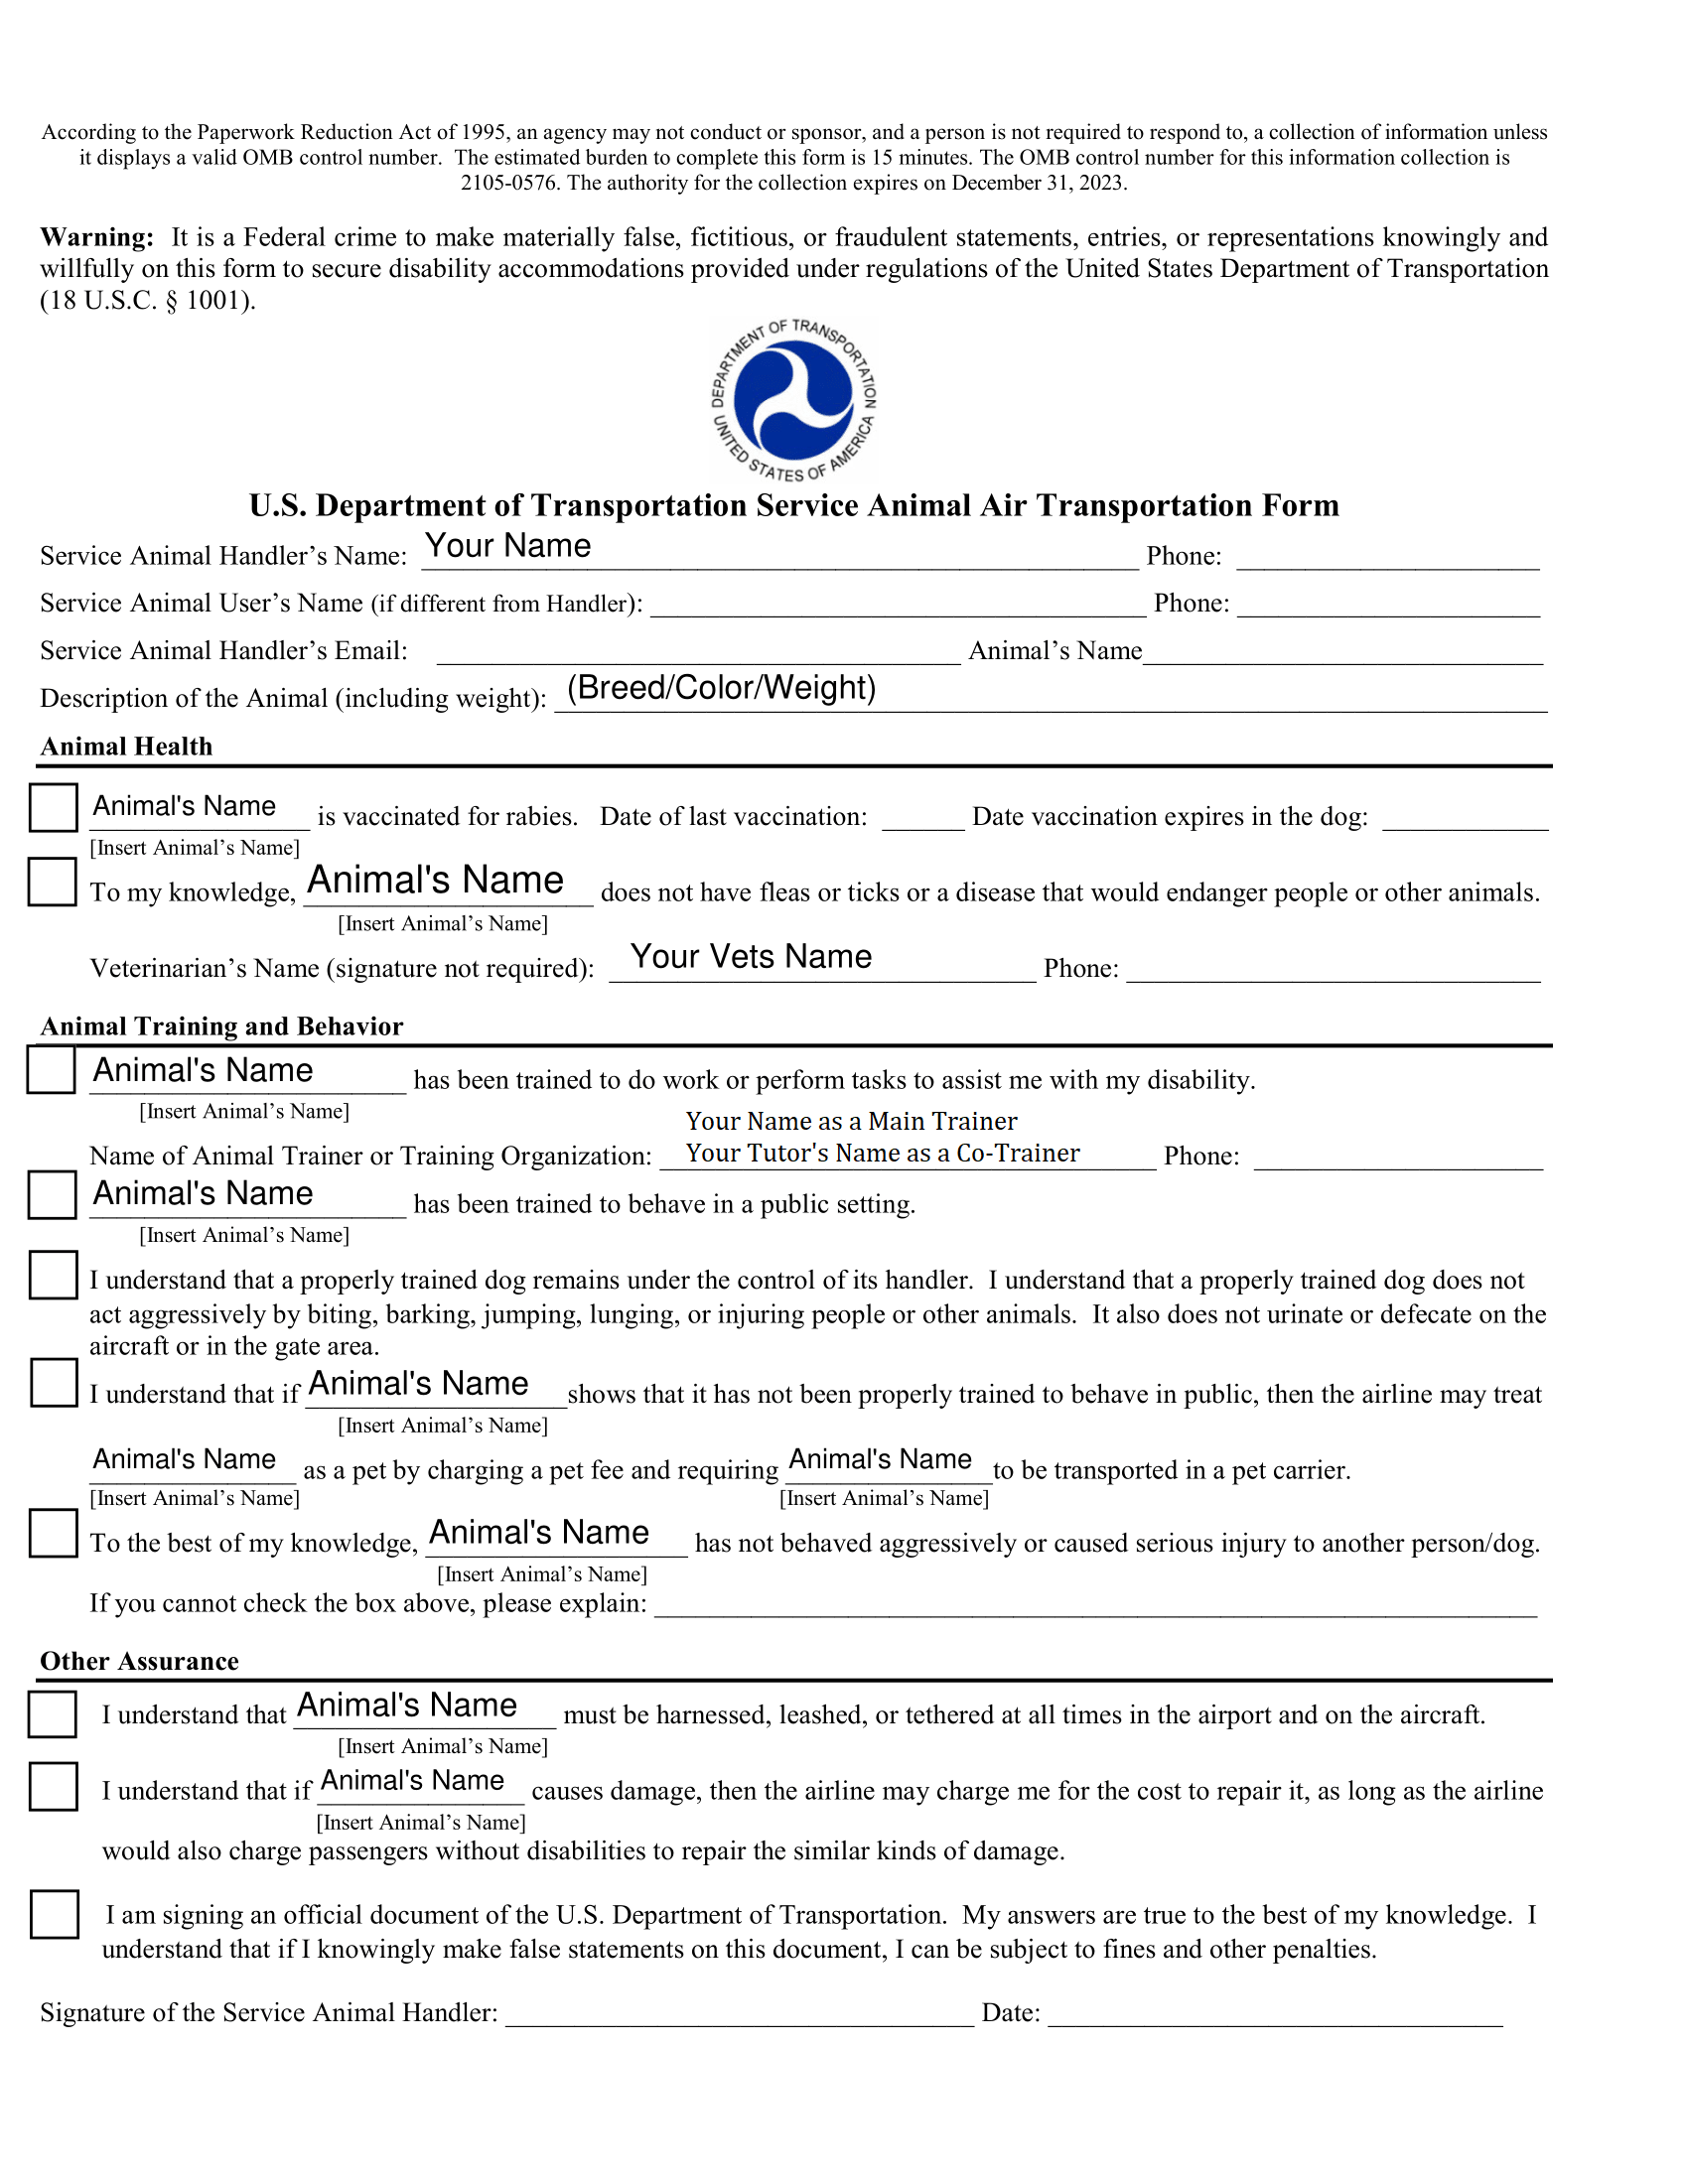 How to Fill Up DOT Service Animal Air Transportation Form To Fly With